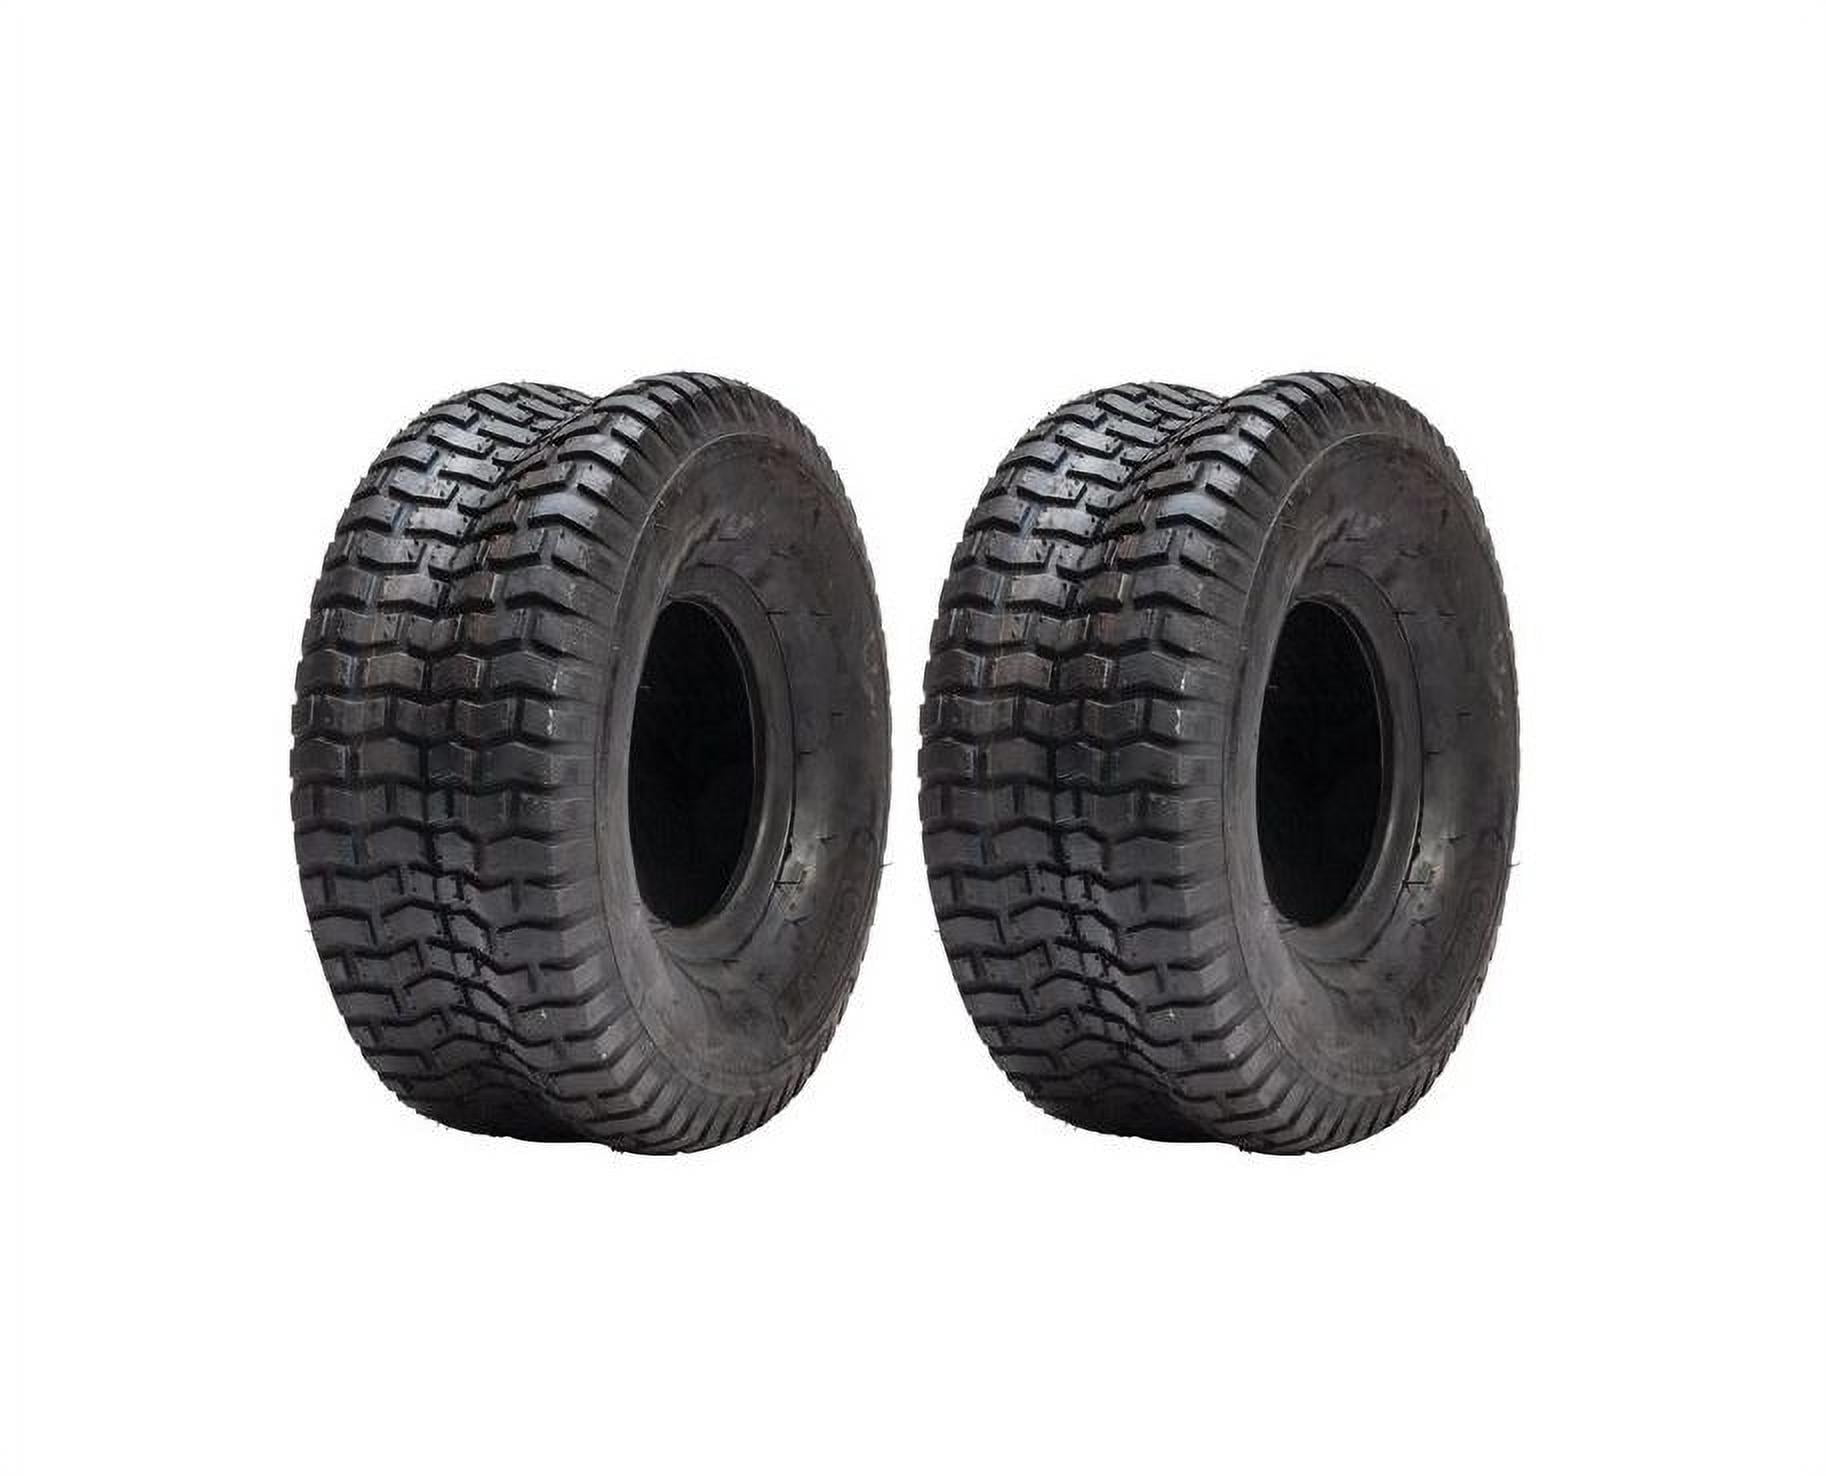 TWO 15X6.00-6 Turf Lawn 15X6-6 4 Ply Rated Lawn Mower Set Two Tires 15 6 6 